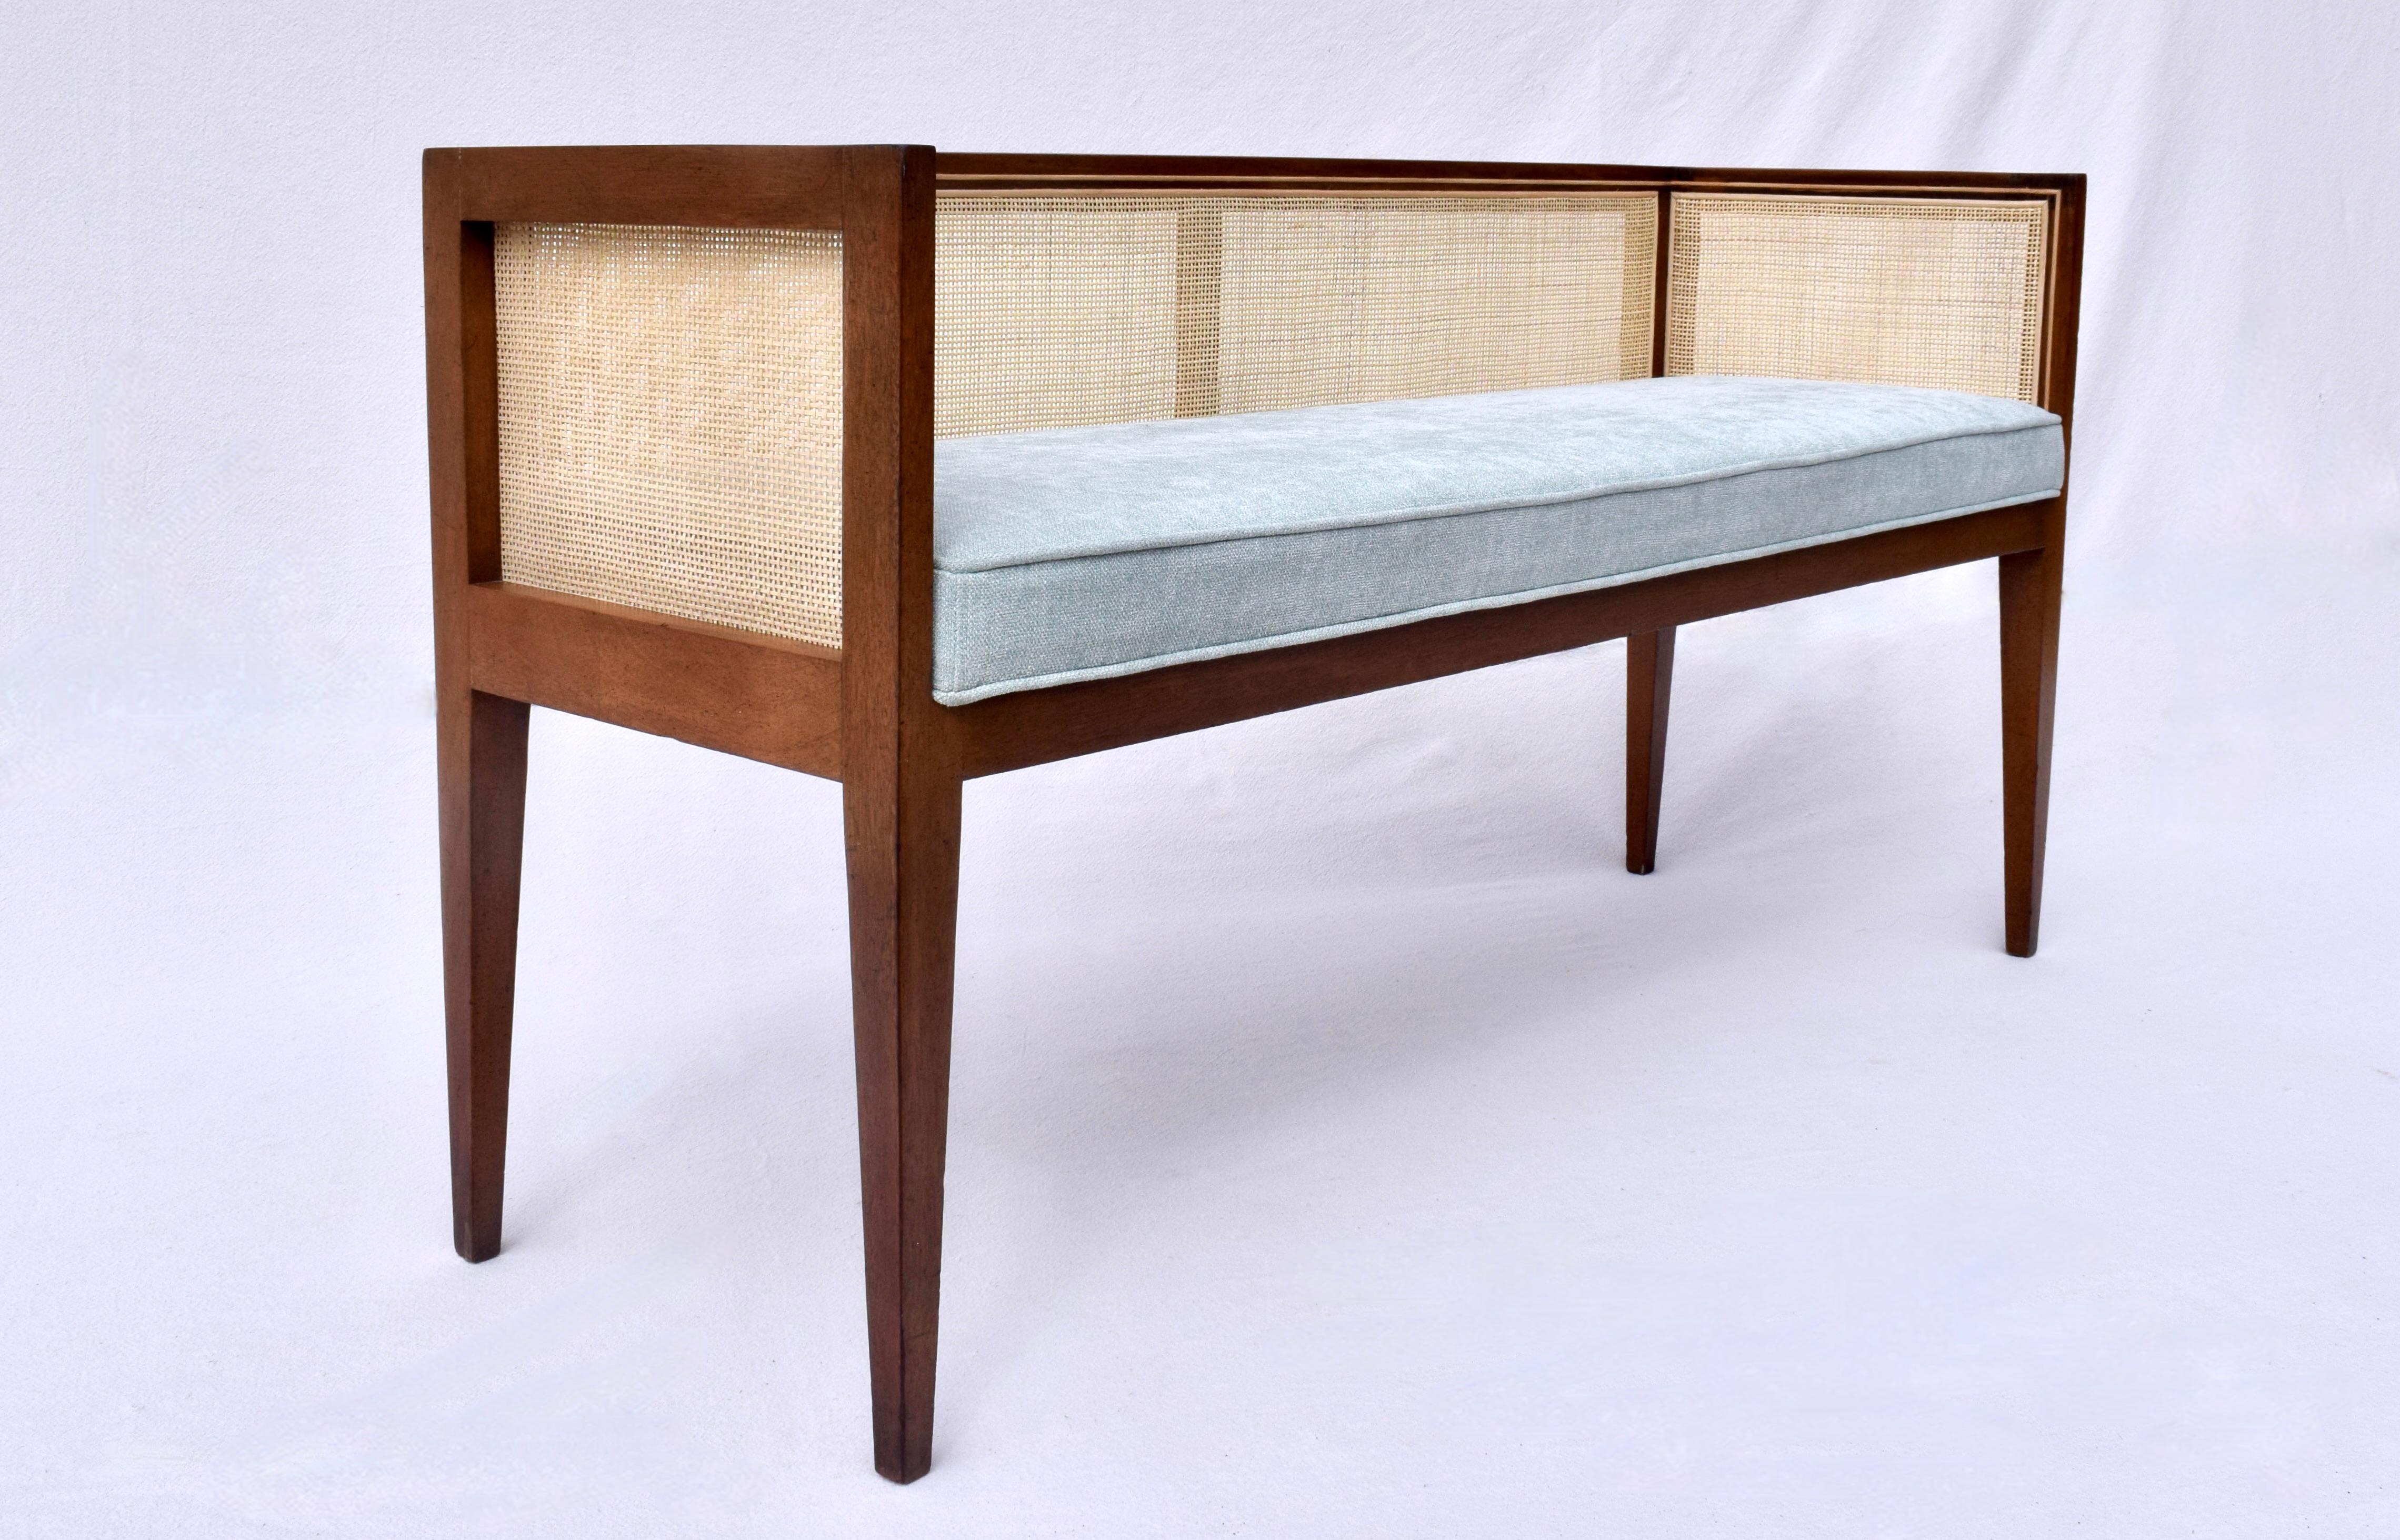 1950s Walnut Window Bench Attributed to Edward Wormley for Dunbar In Good Condition For Sale In Southampton, NJ